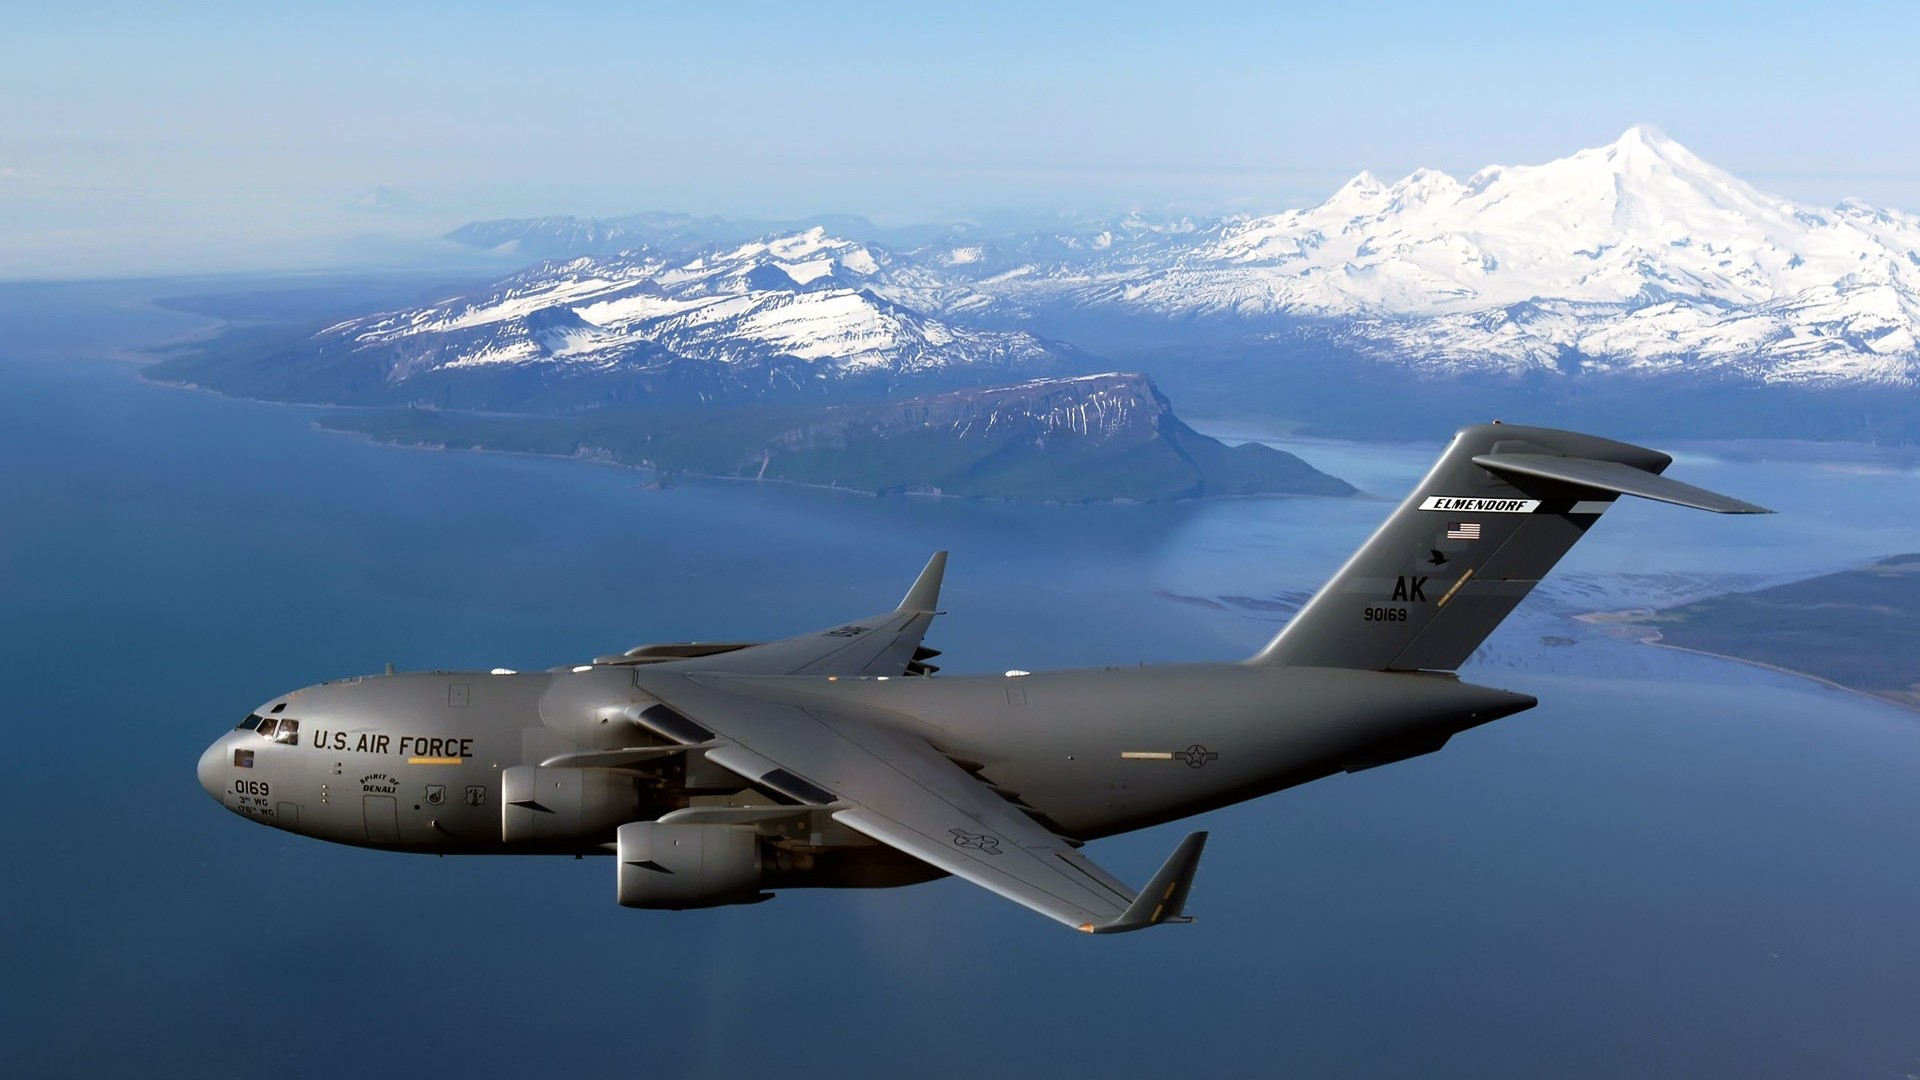 Military Aircraft Airplane Jets Sky Boeing C 17 Globemaster Iii Aircraft Mountains Landscape Militar 1920x1080